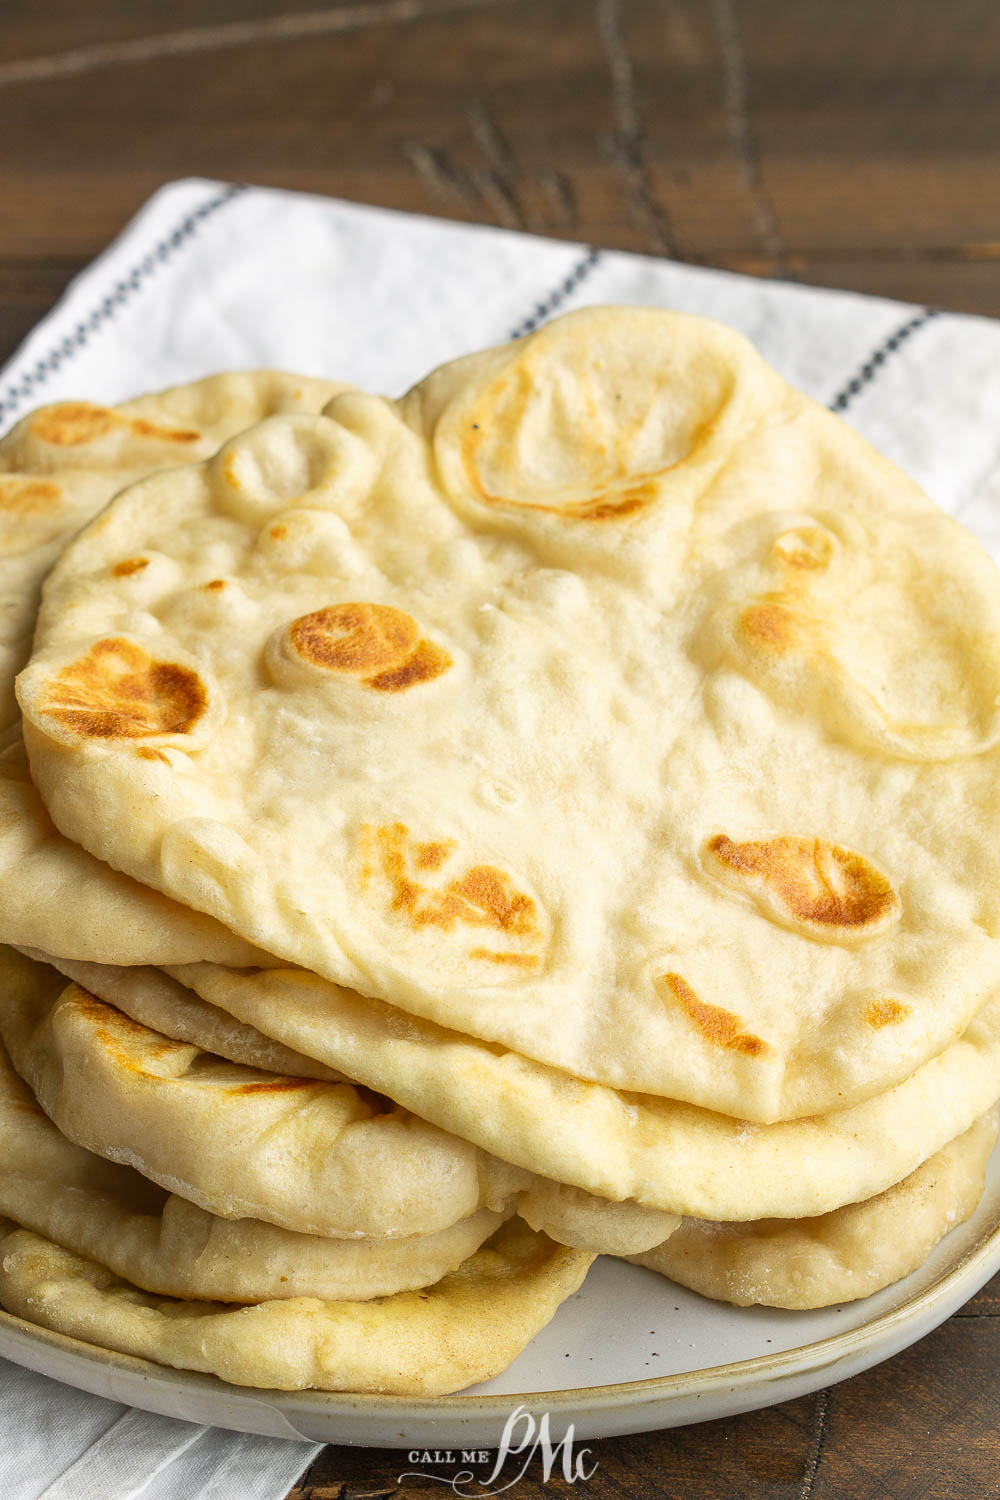 Herbed Garlic Butter Naan is soft, buttery, and delicious.  If you're new to working with yeast, this recipe is easy and only takes a 1 hour to proof and 3 minutes to cook! #naan #garlic #butter #bread #pita #flatbread #recipe